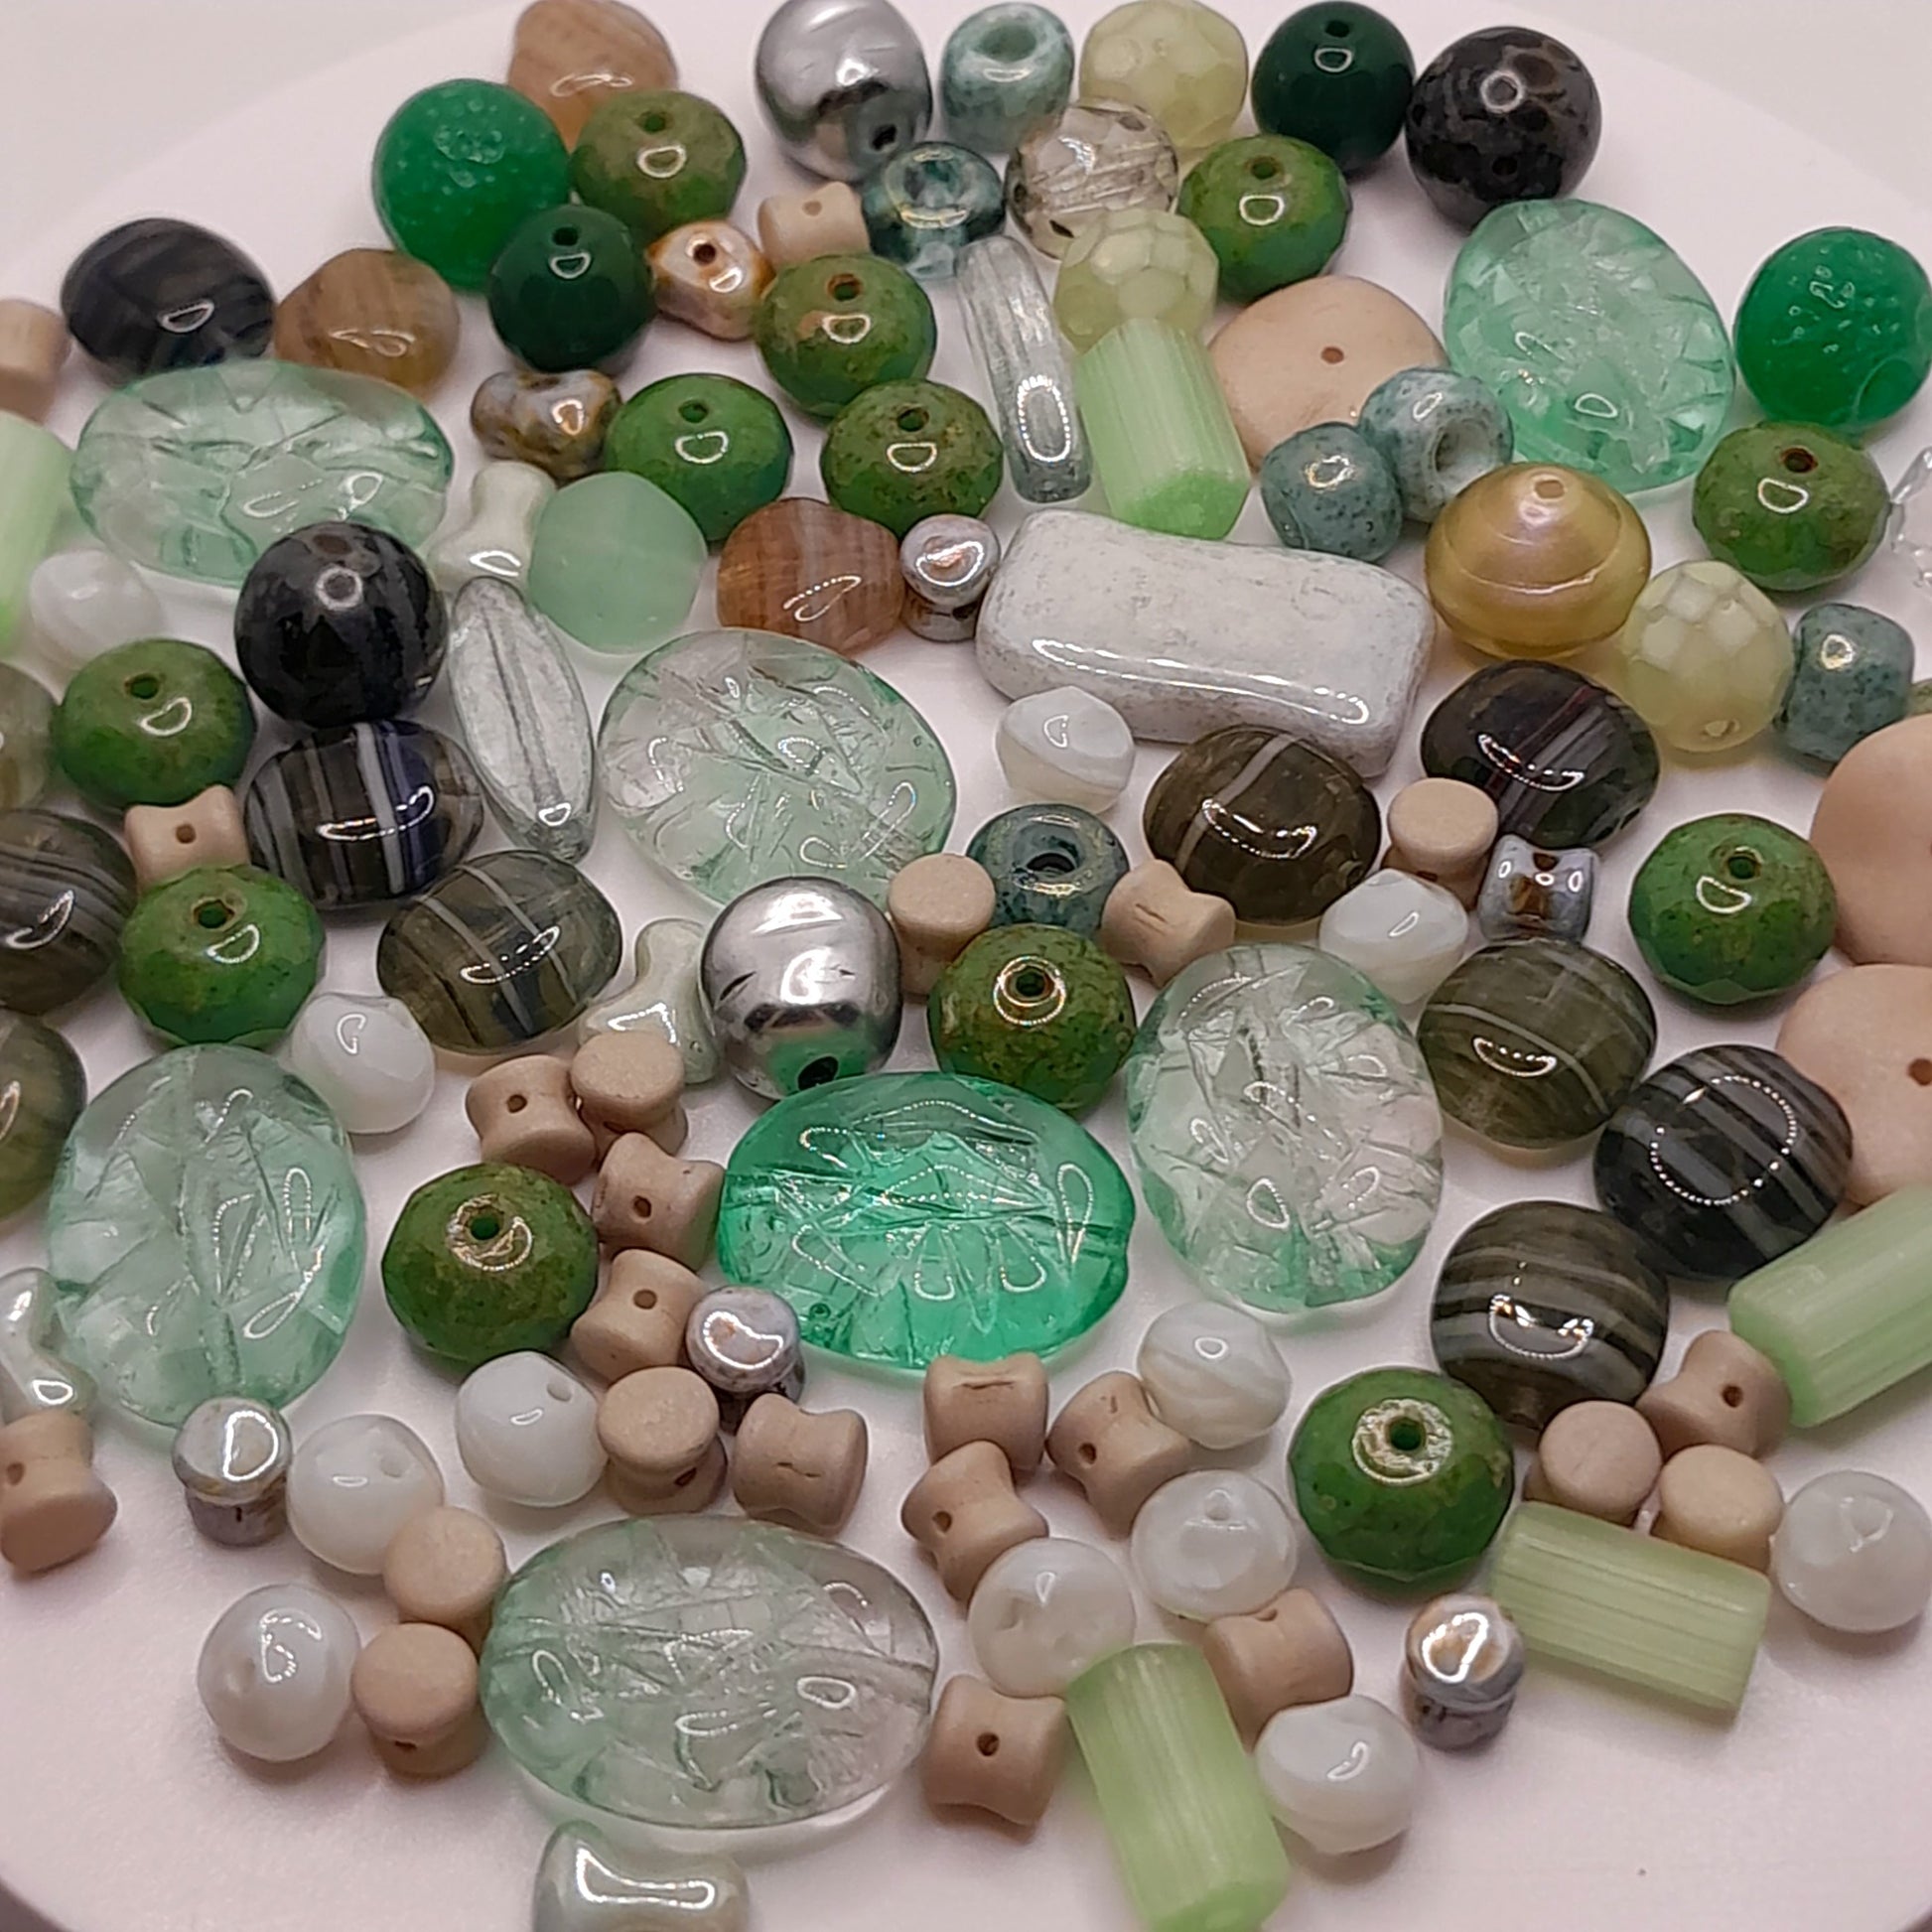 PRECIOSA czech beads "Jade" for making bracelets, necklaces, earrings and other jewelry. - VadymShop